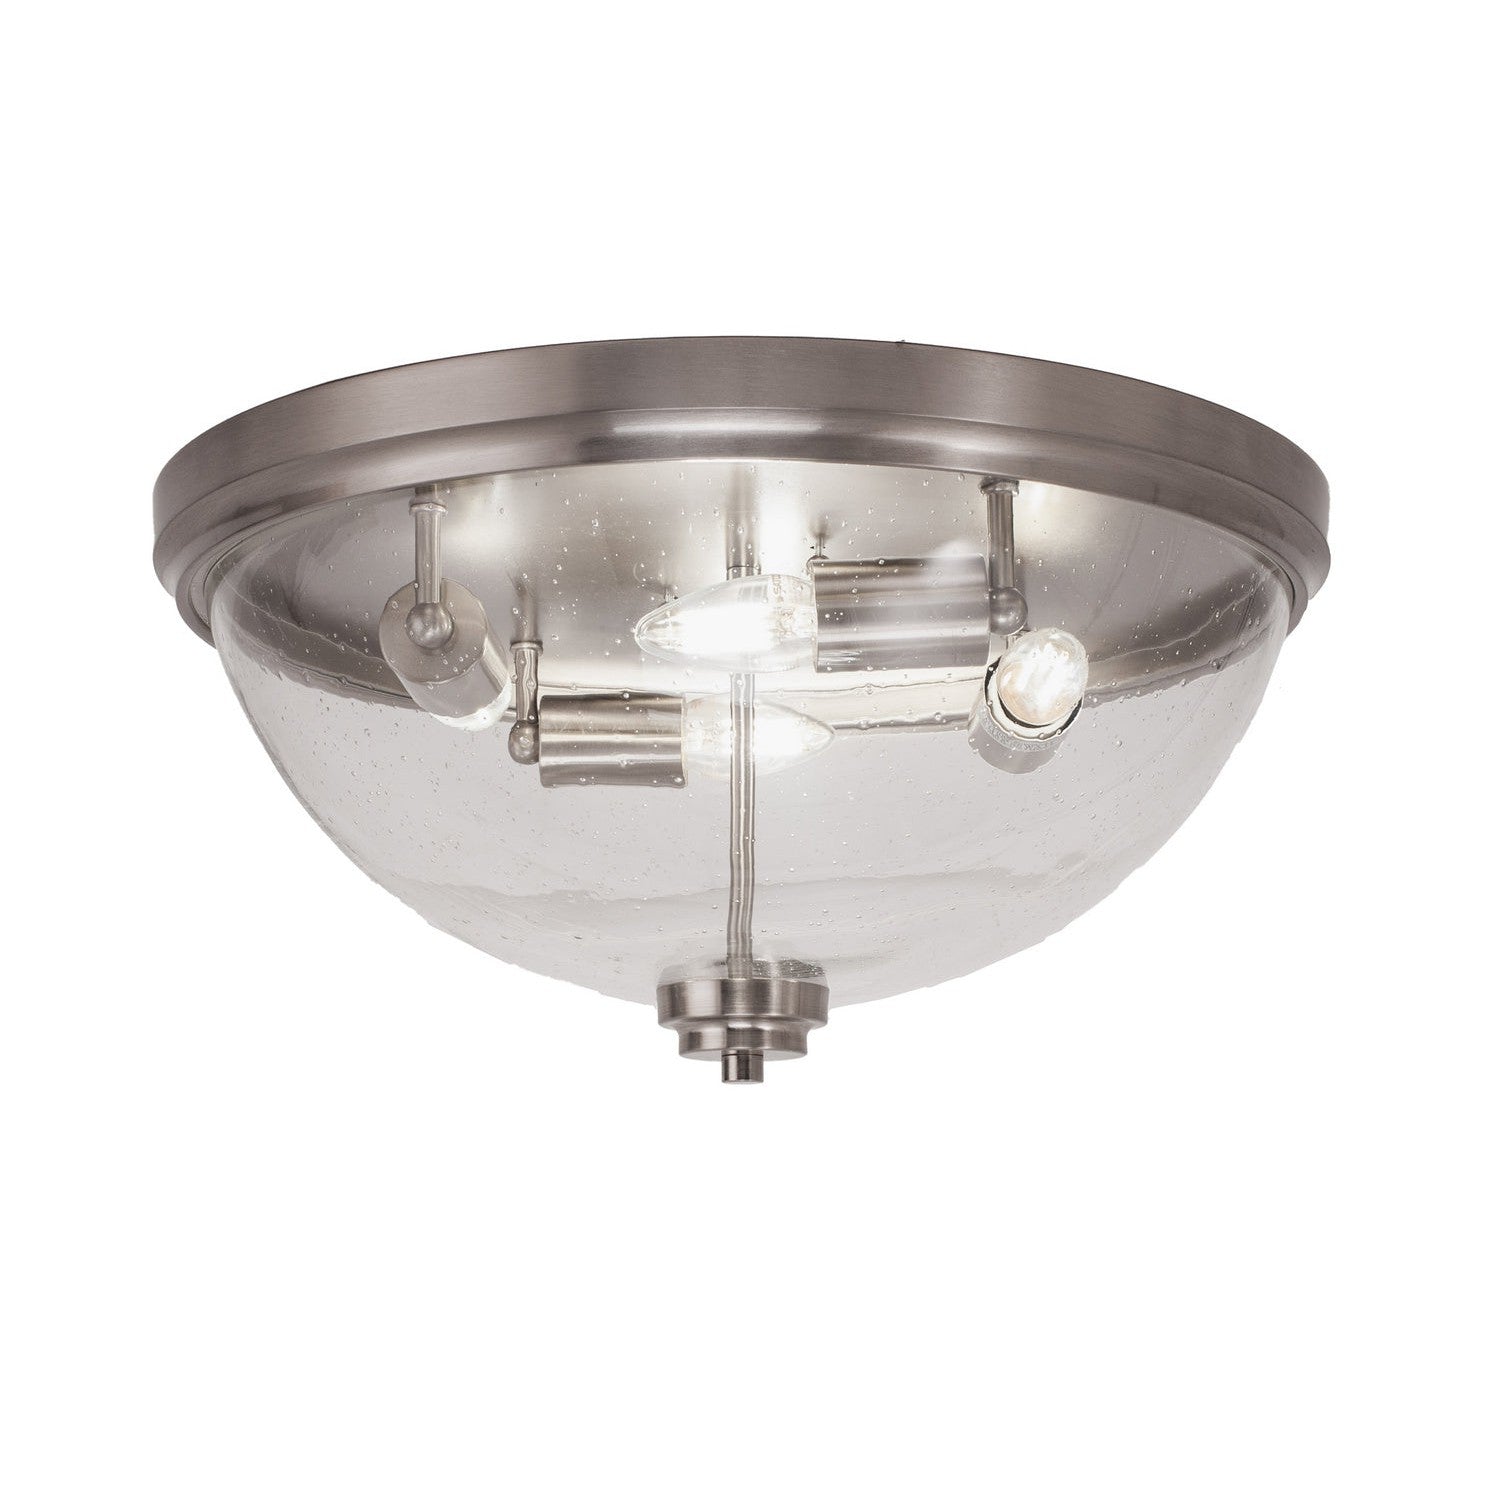 Toltec Any 828-bn-0 Ceiling Light - Brushed Nickel